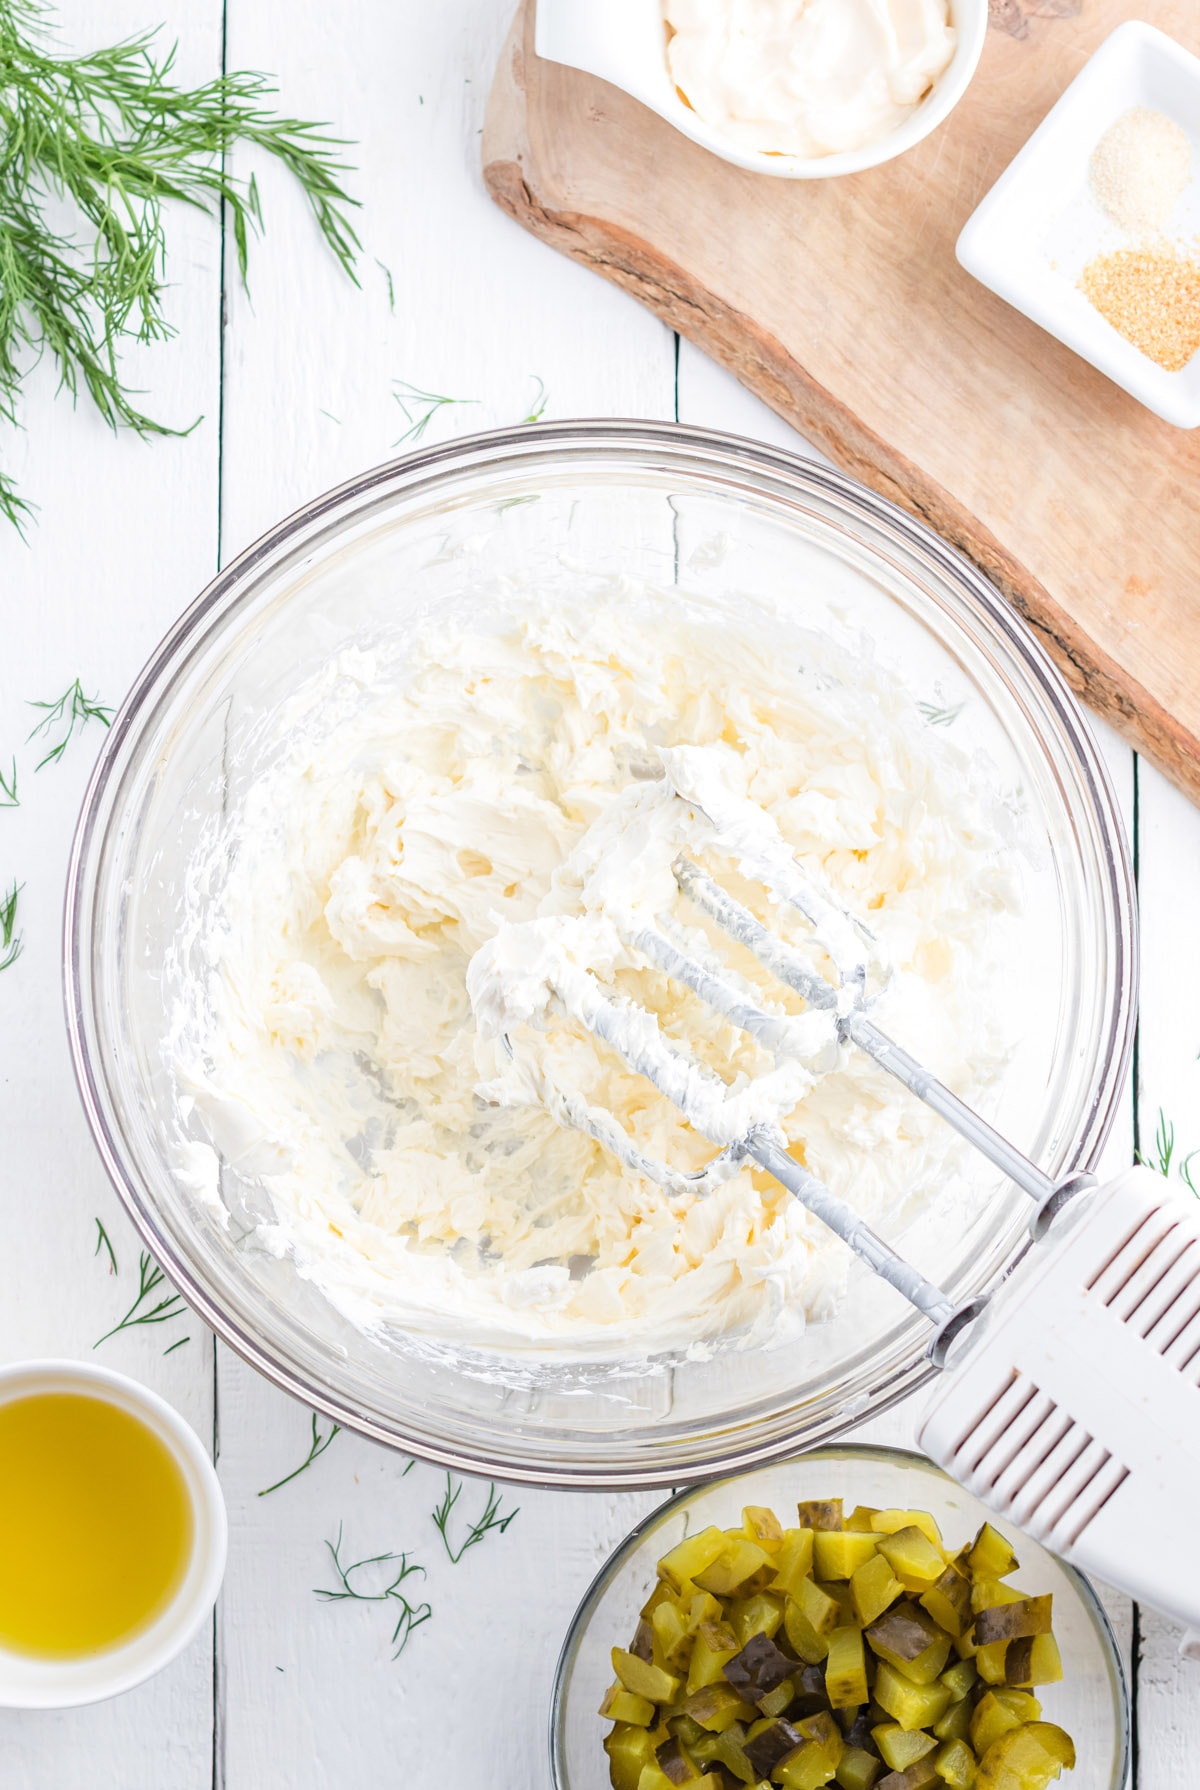 Mix cream cheese with an electric mixer